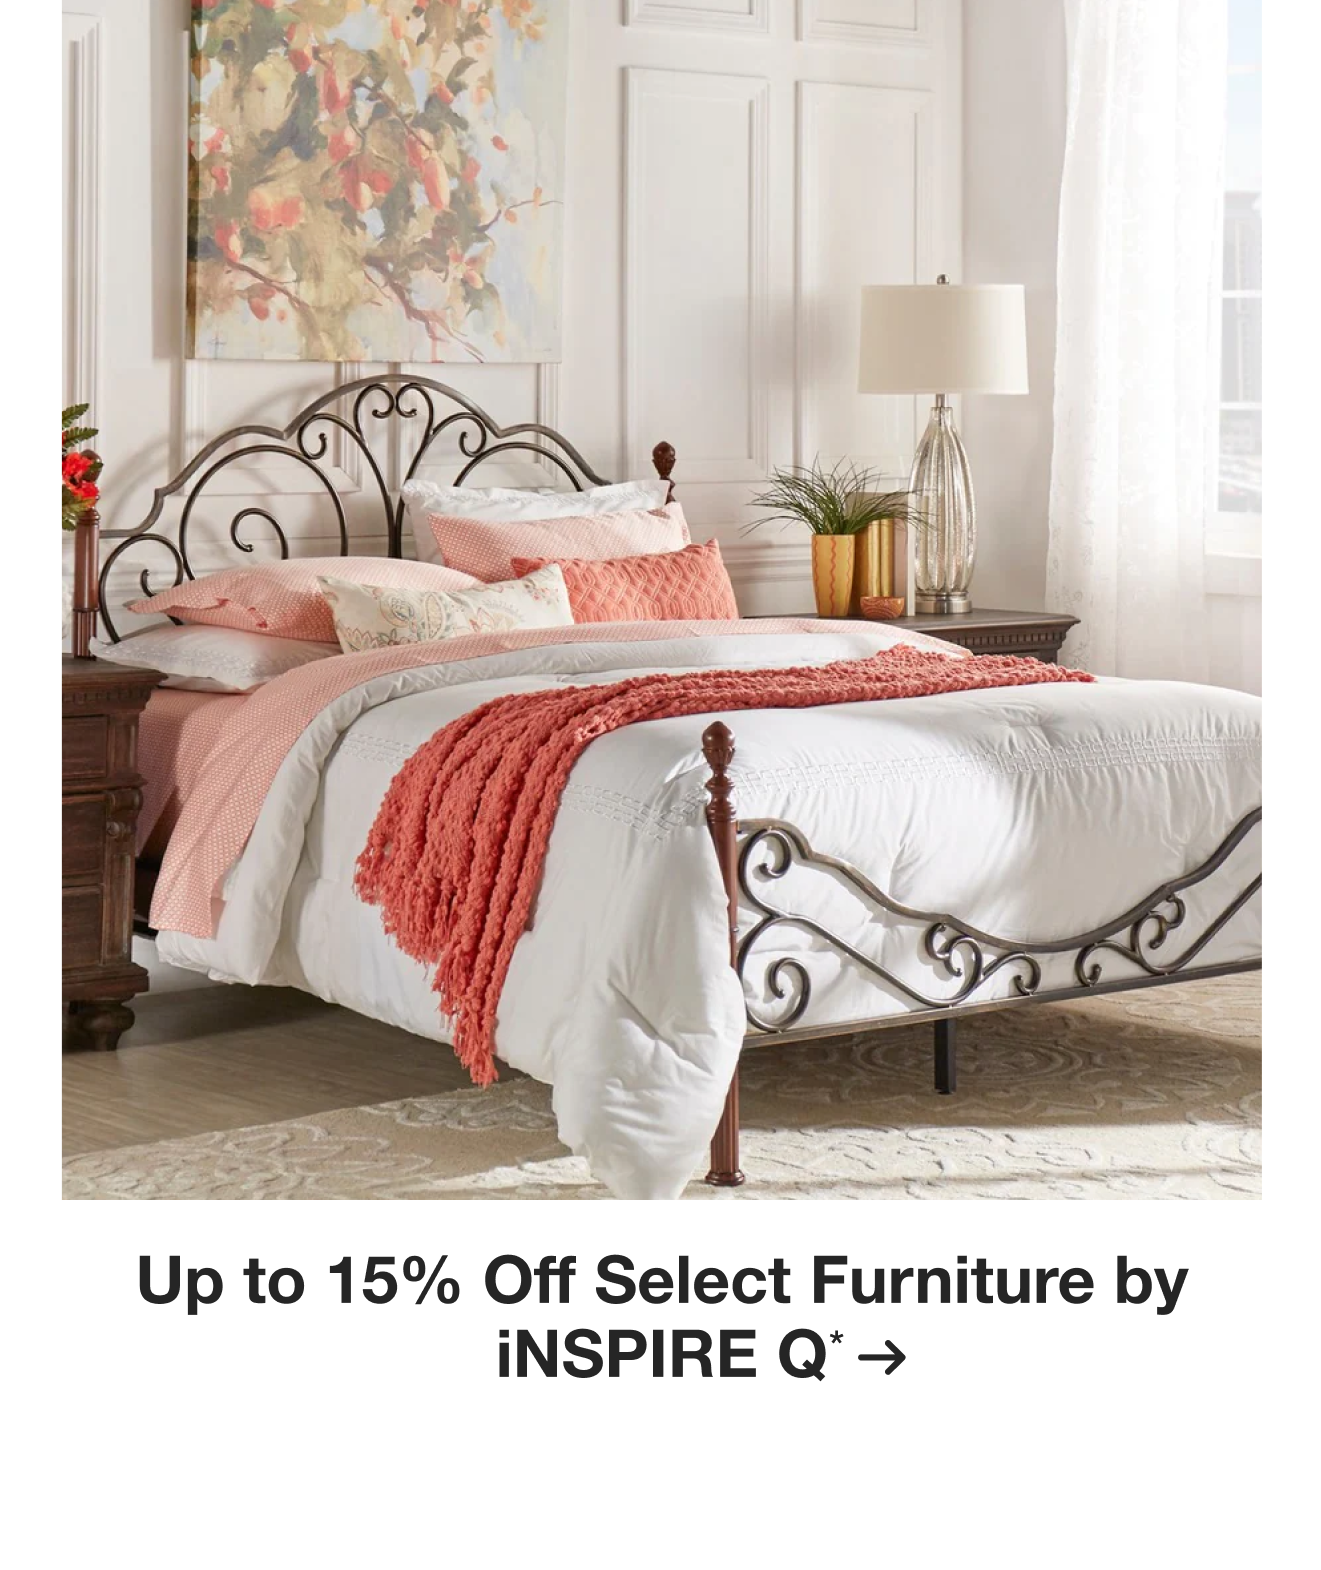 Up to 15% Off Select Furniture by iNSPIRE Q*